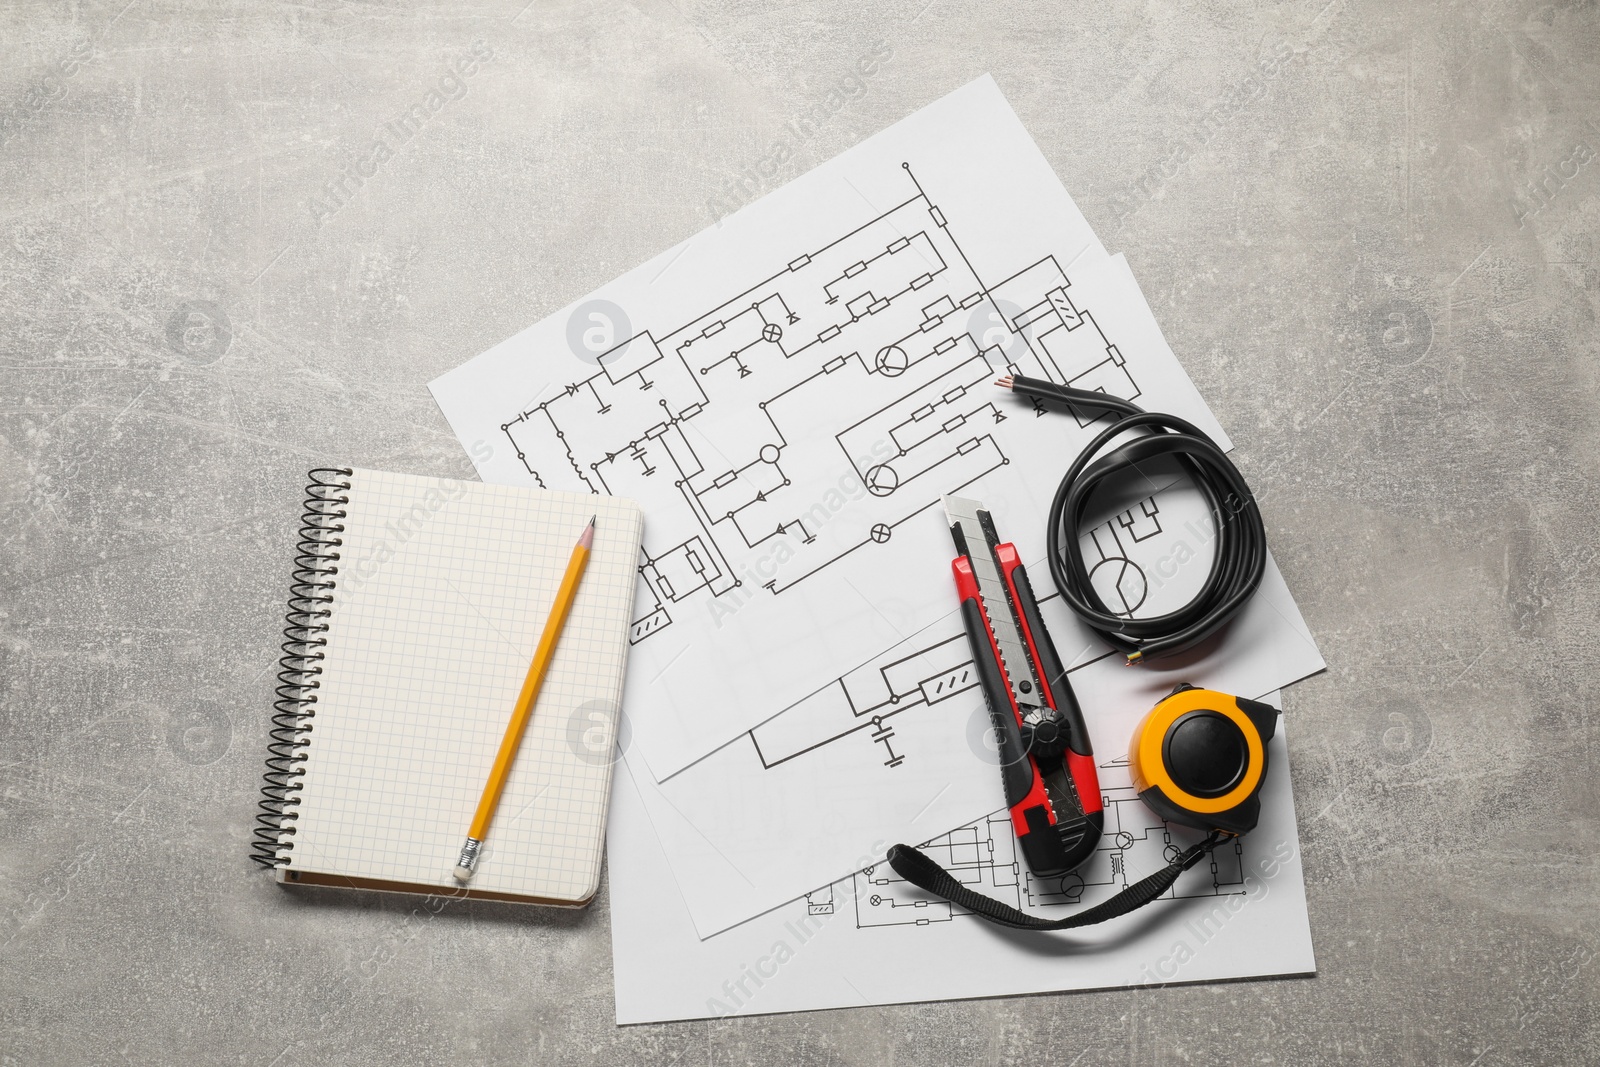 Photo of Wiring diagrams, wires and tools on grey table, flat lay